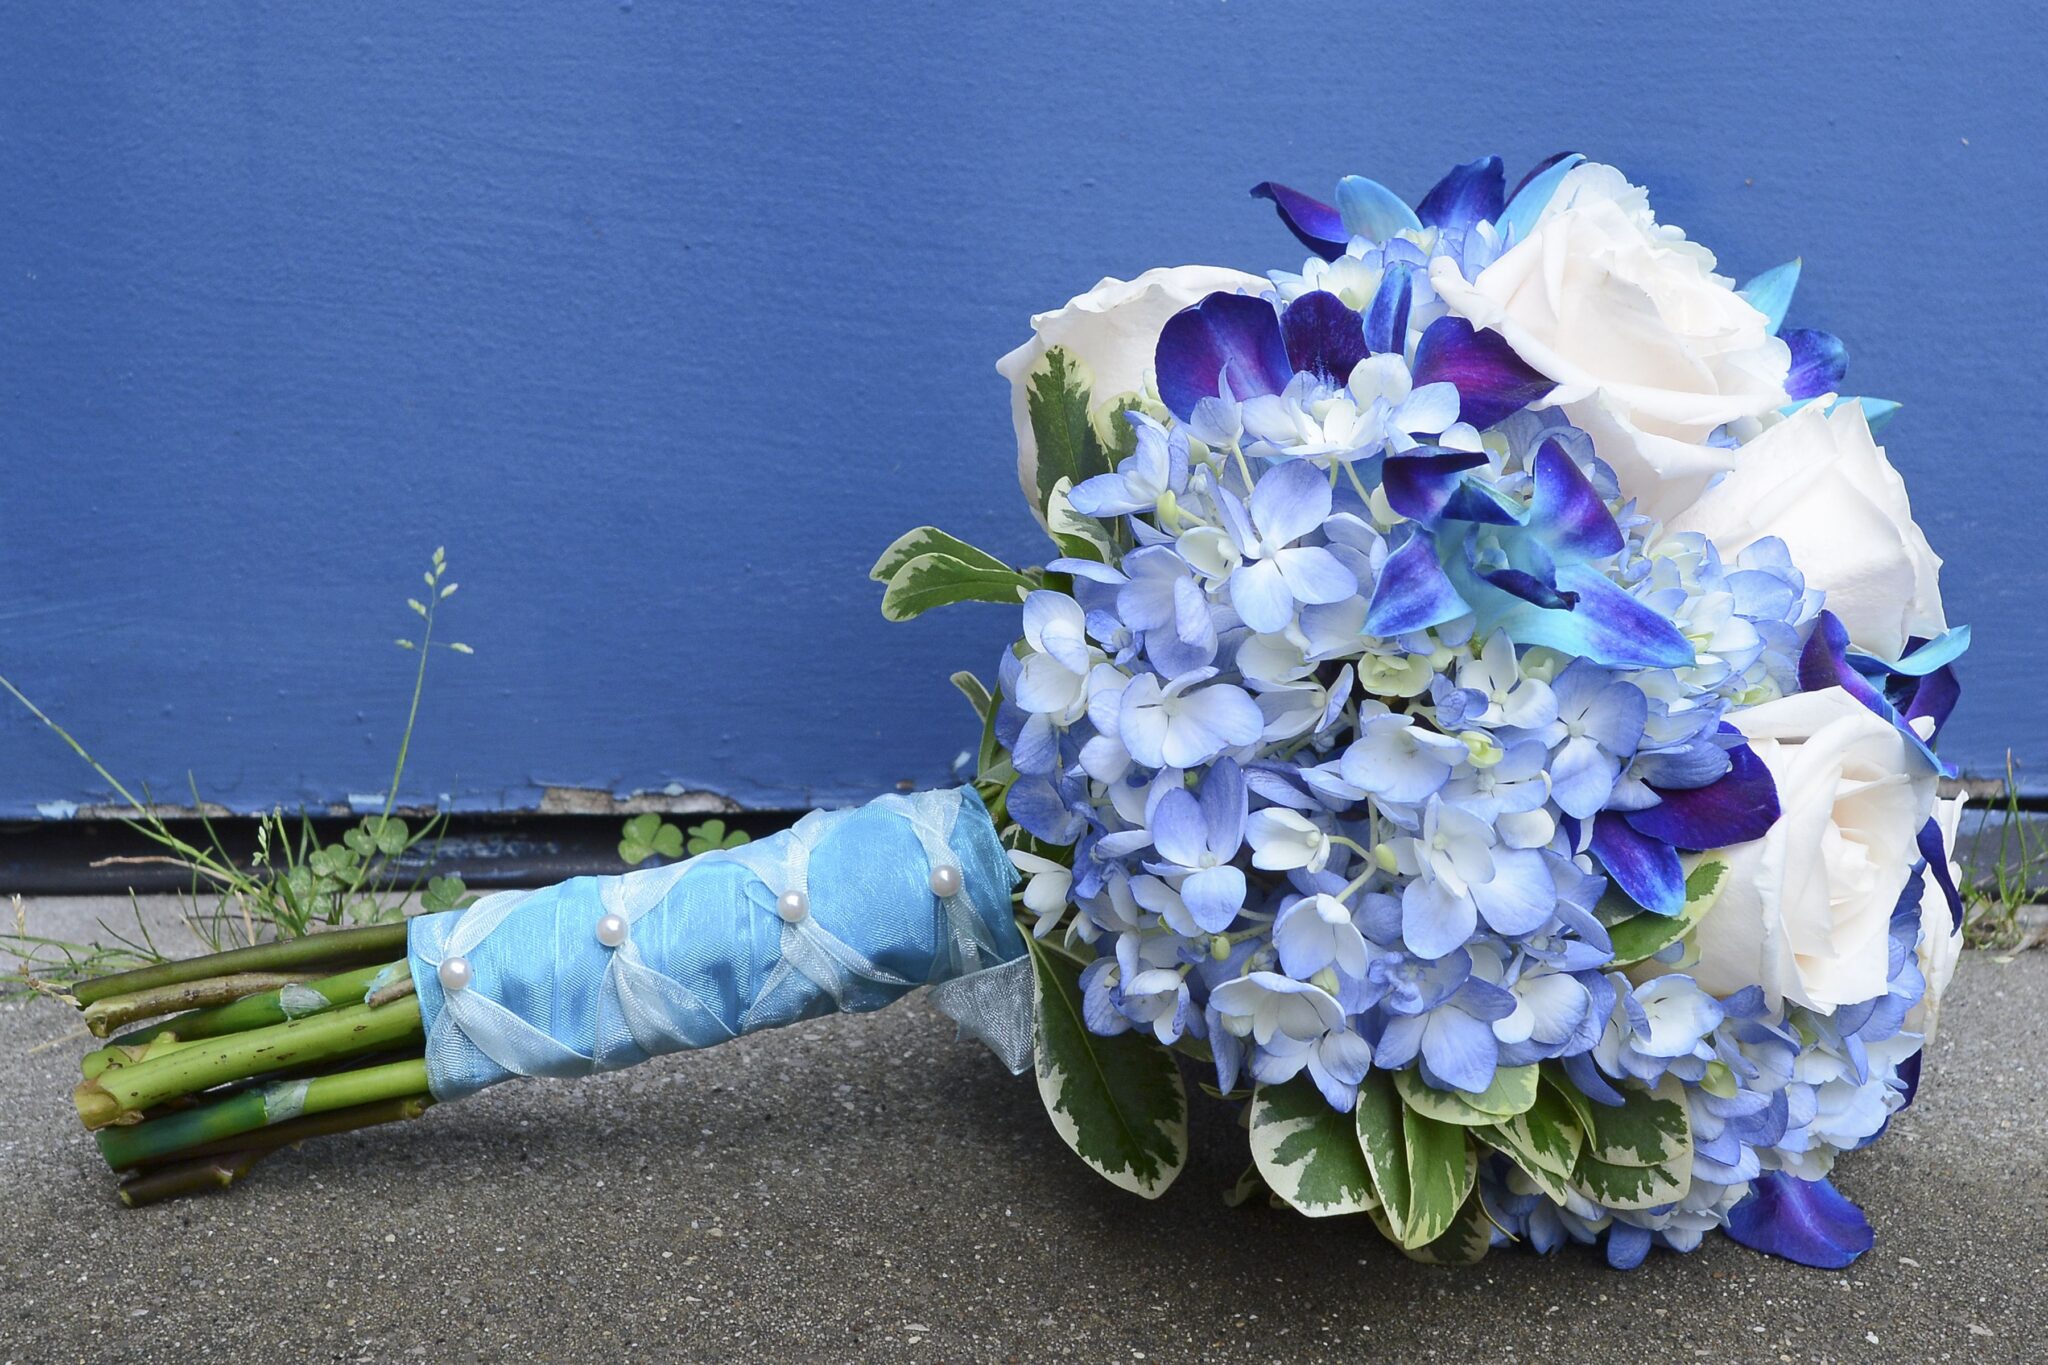 choose blue roses wedding bouquets for your wedding 9 2048x1365 - Choose Blue Roses Wedding Bouquets for Your Wedding